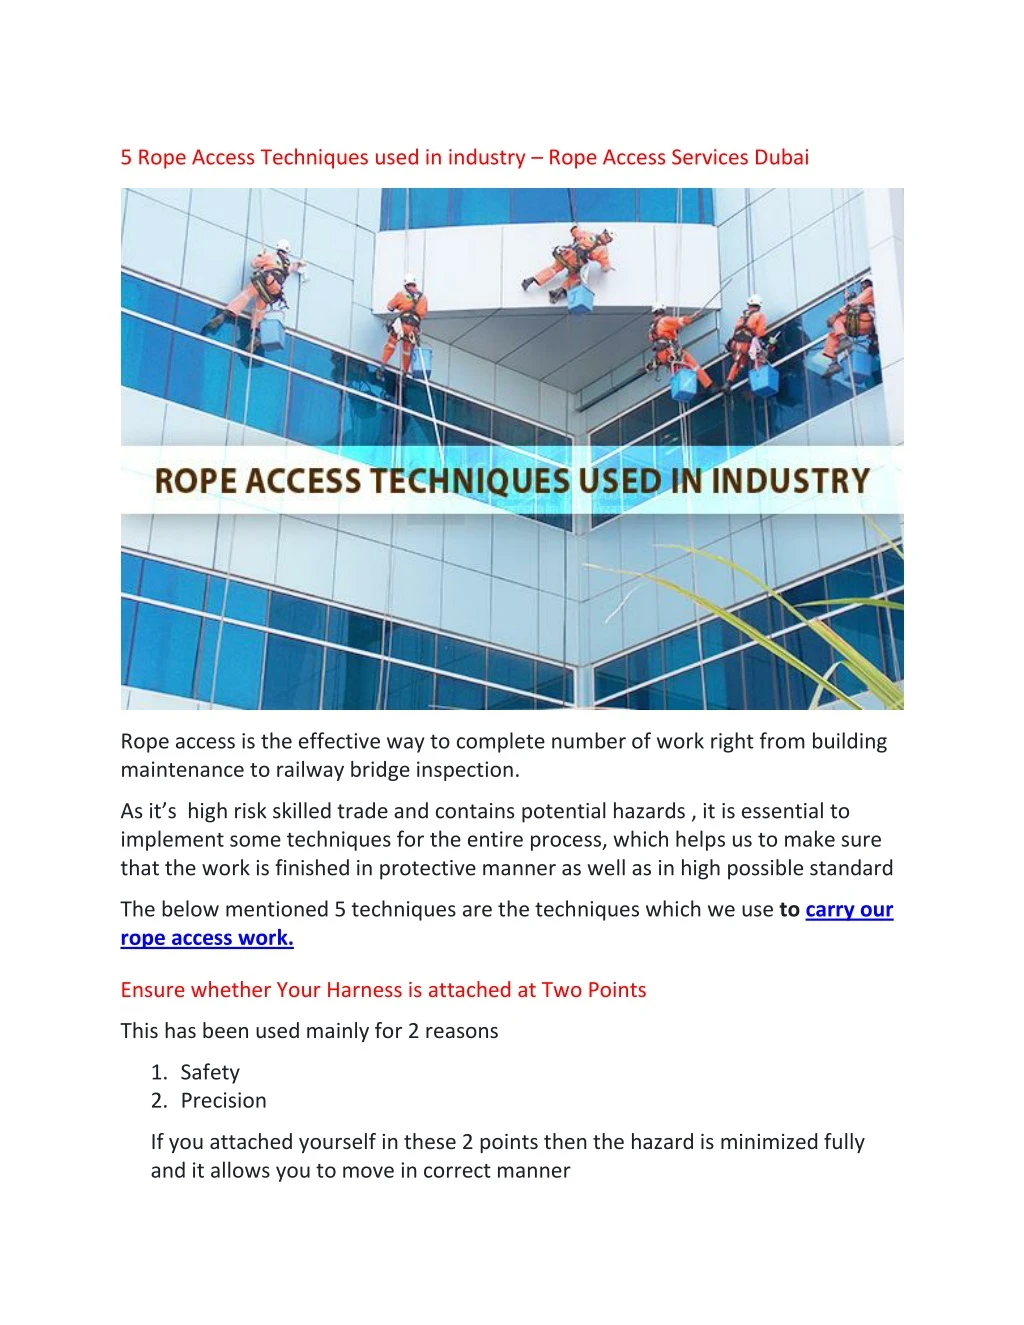 5 rope access techniques used in industry rope